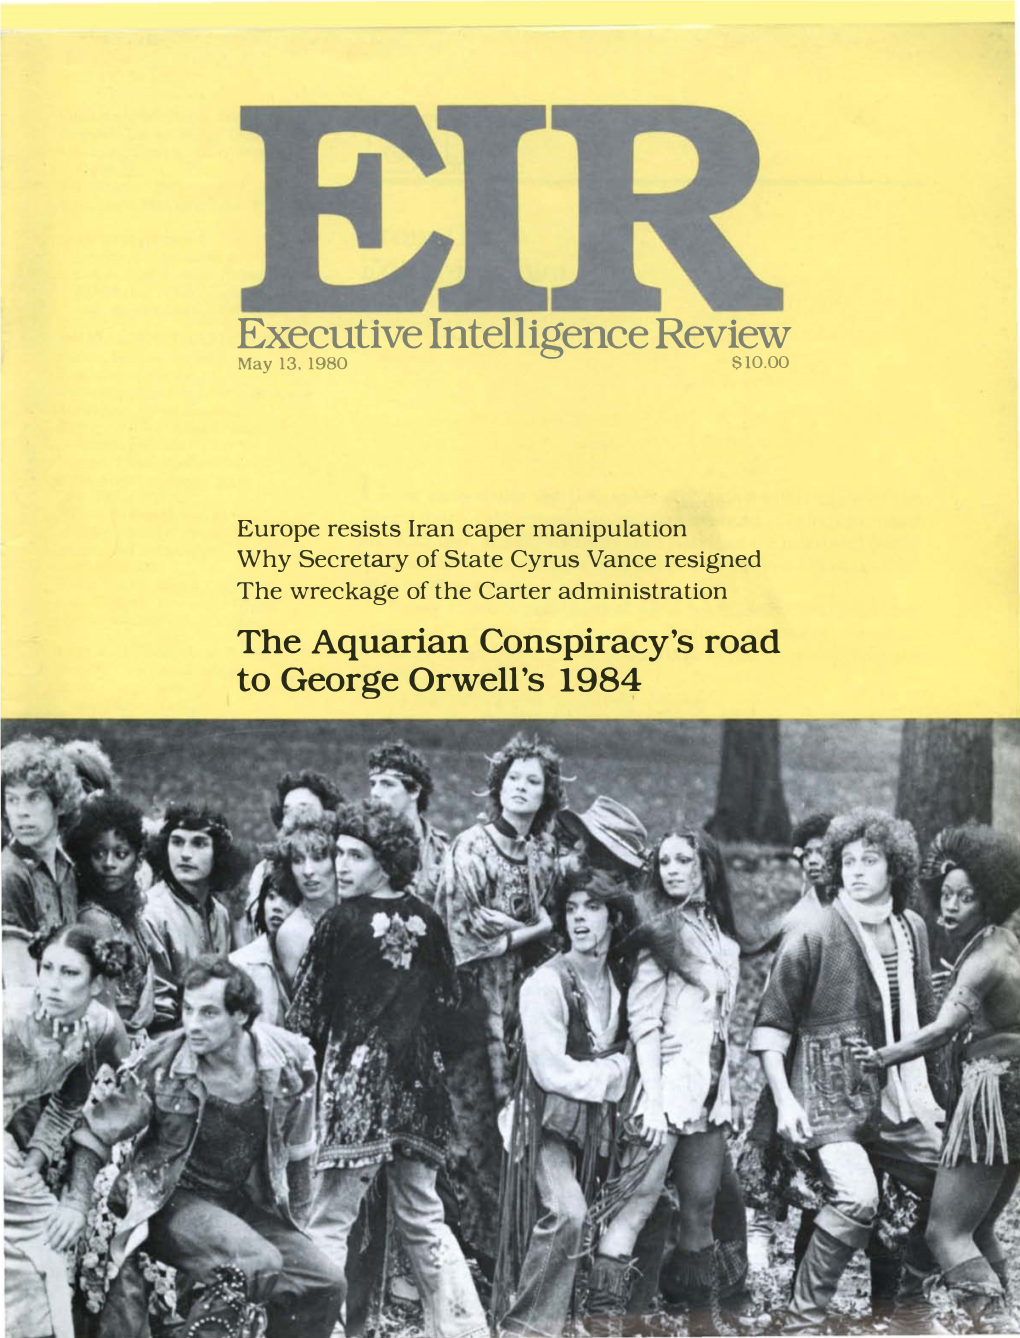 Executive Intelligence Review, Volume 7, Number 18, May 13, 1980